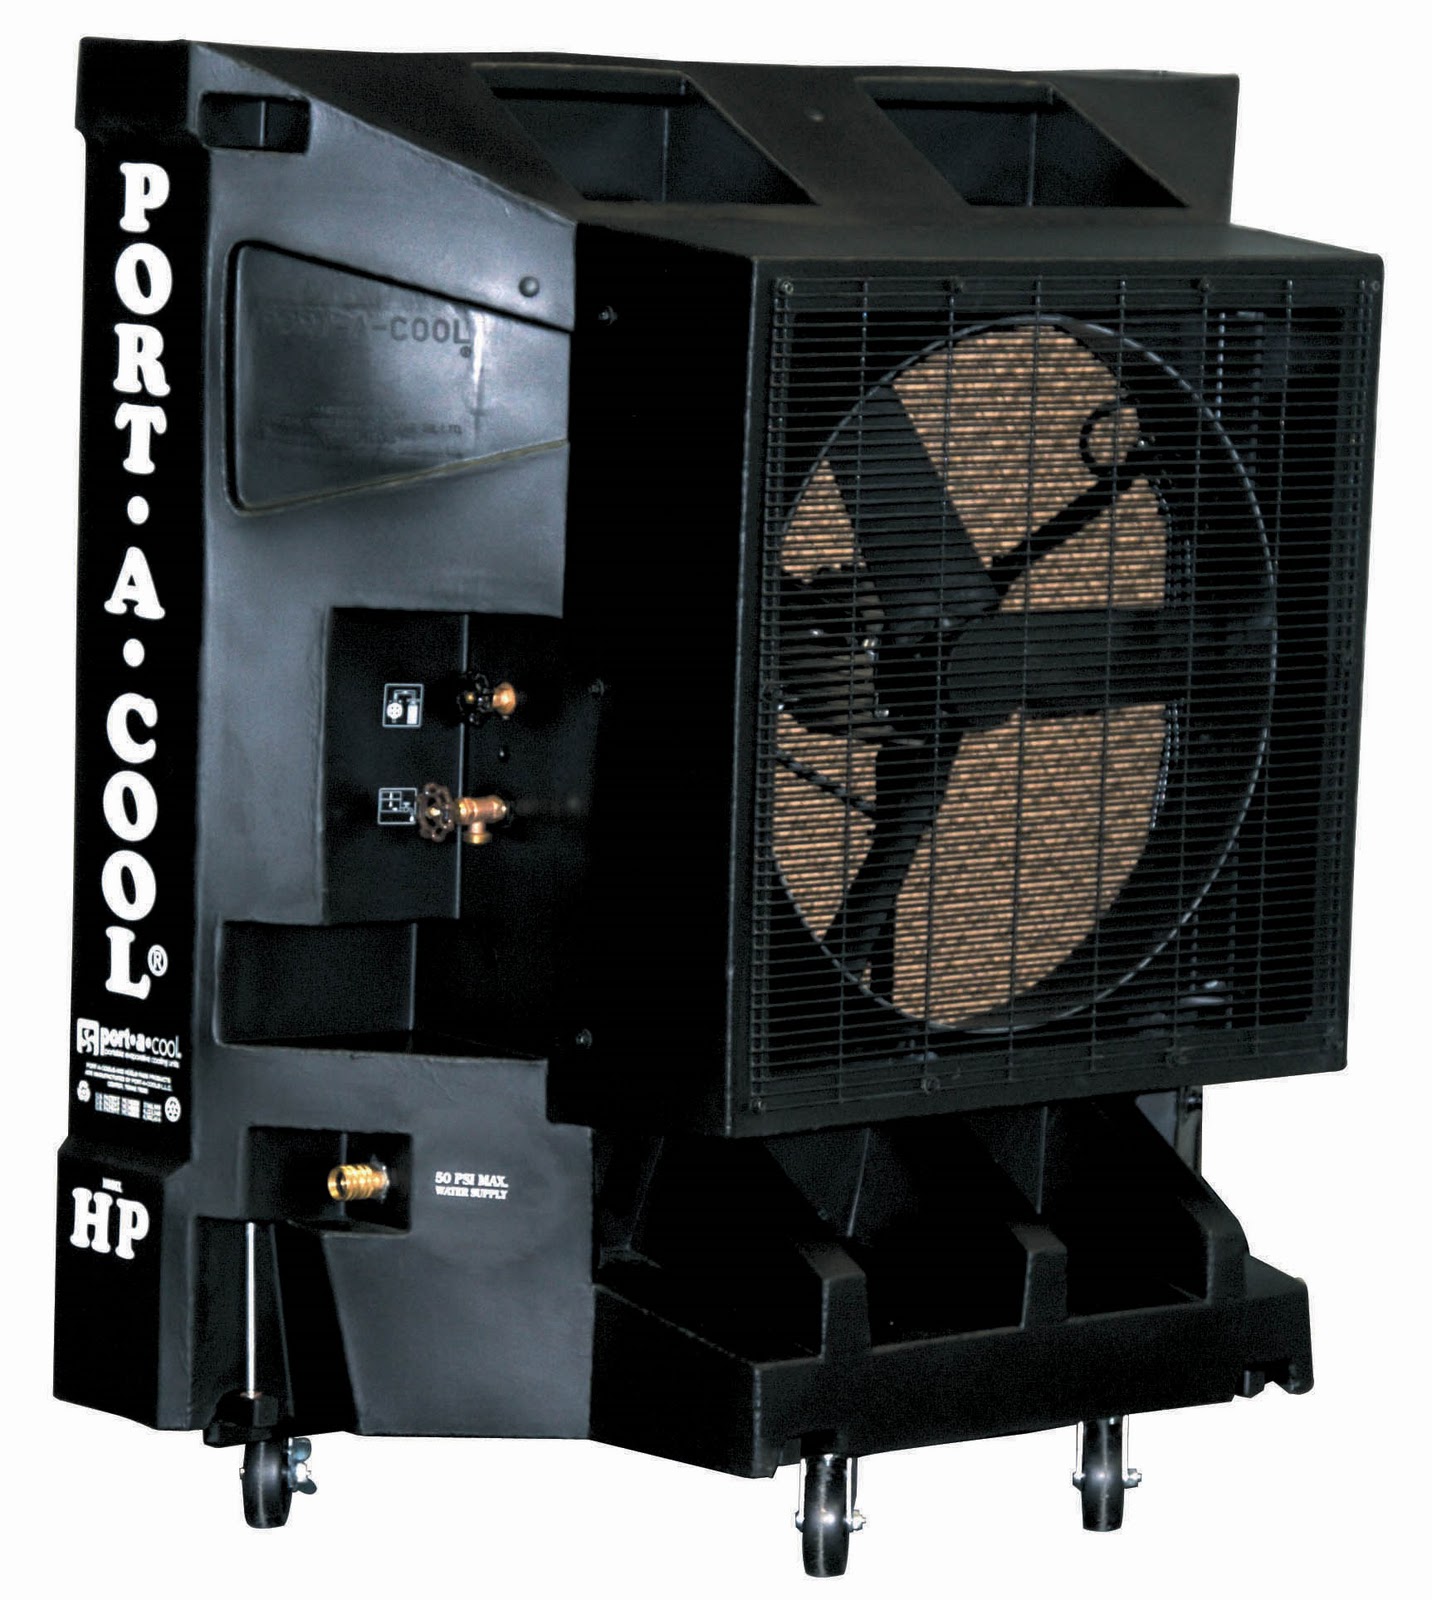 Port-A-Cool 48" evaporative cooler: Life´s Cool Europe´s Port-A-Cool